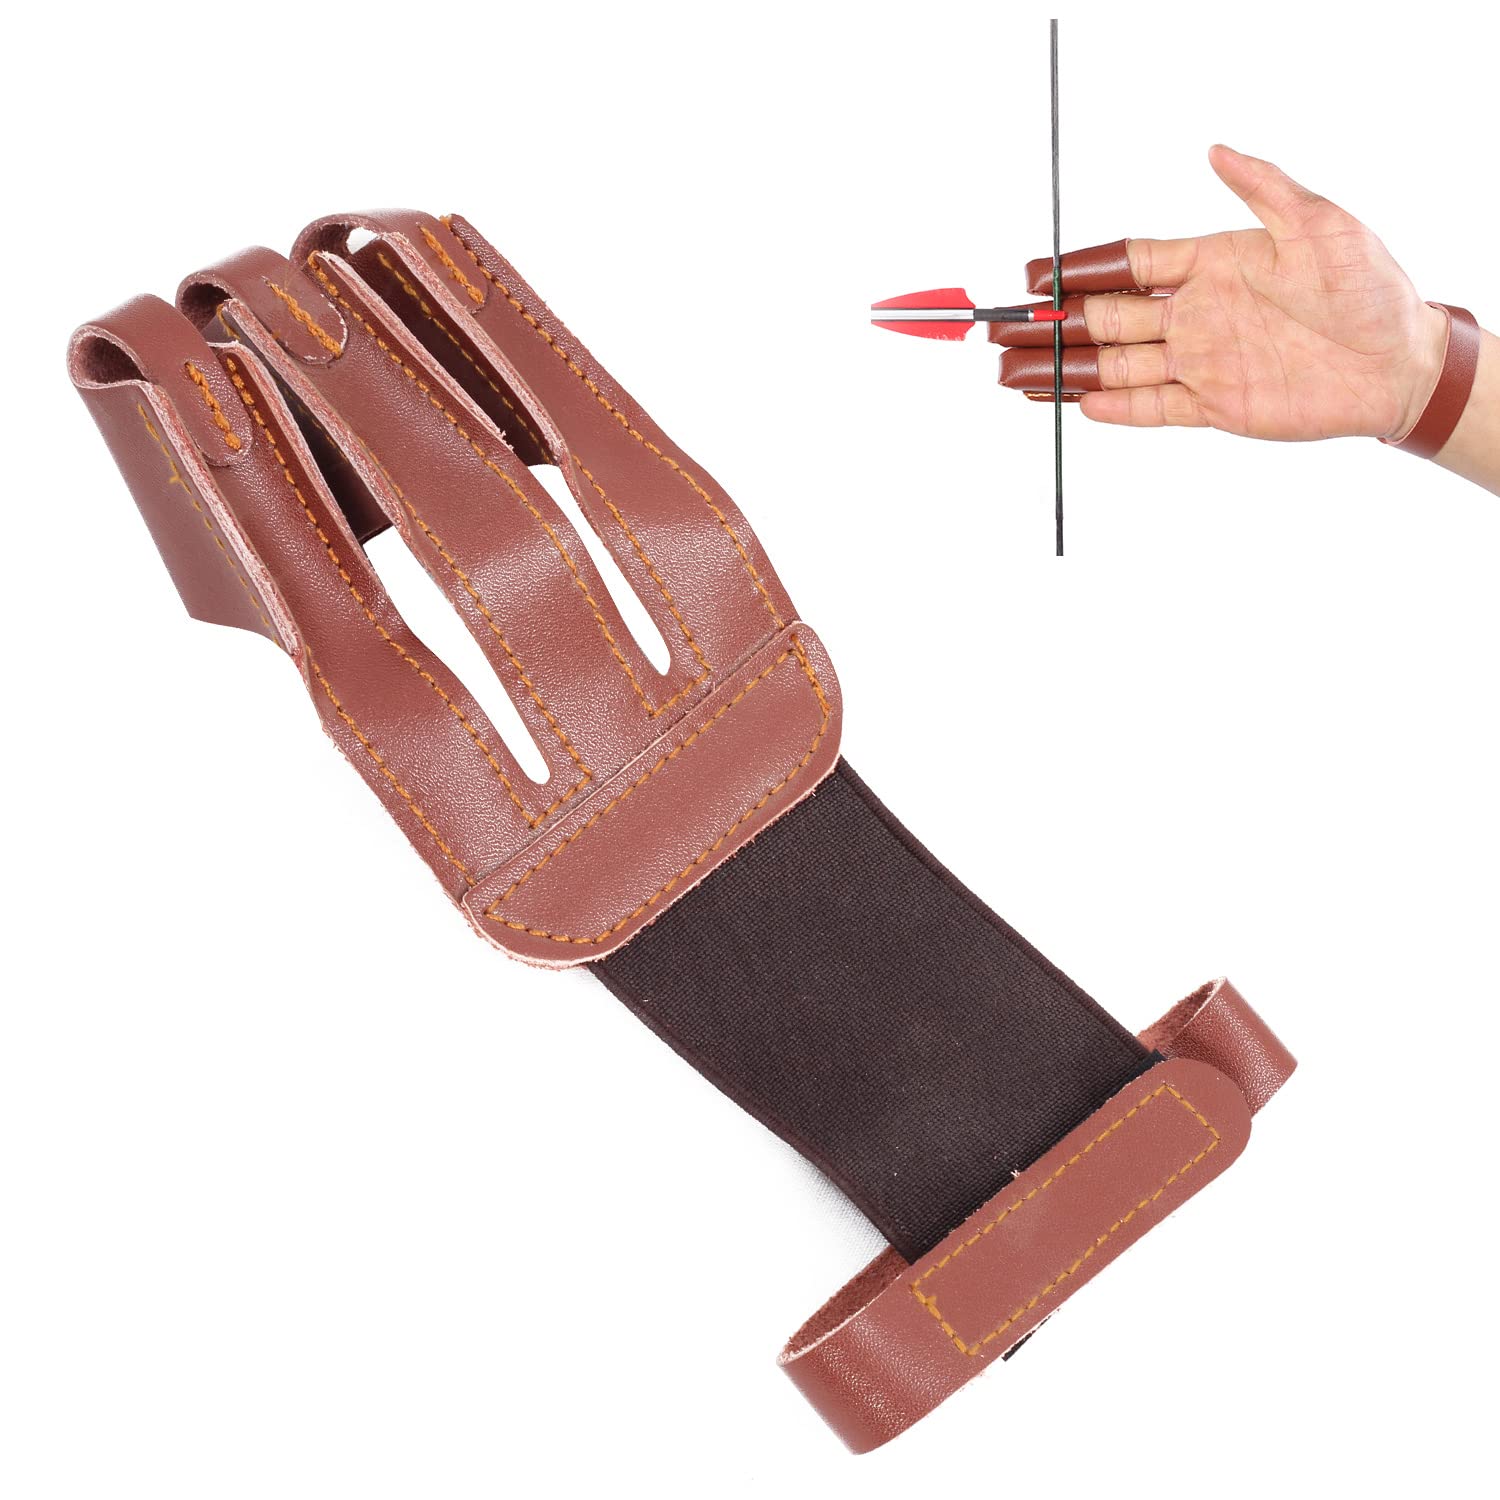 FENJANER Archery Glove 3 Finger Guard Leather Finger Shooting Hunting Arrow  Bow Archery Gear Accessories for Adult & Youth Beginner Brown